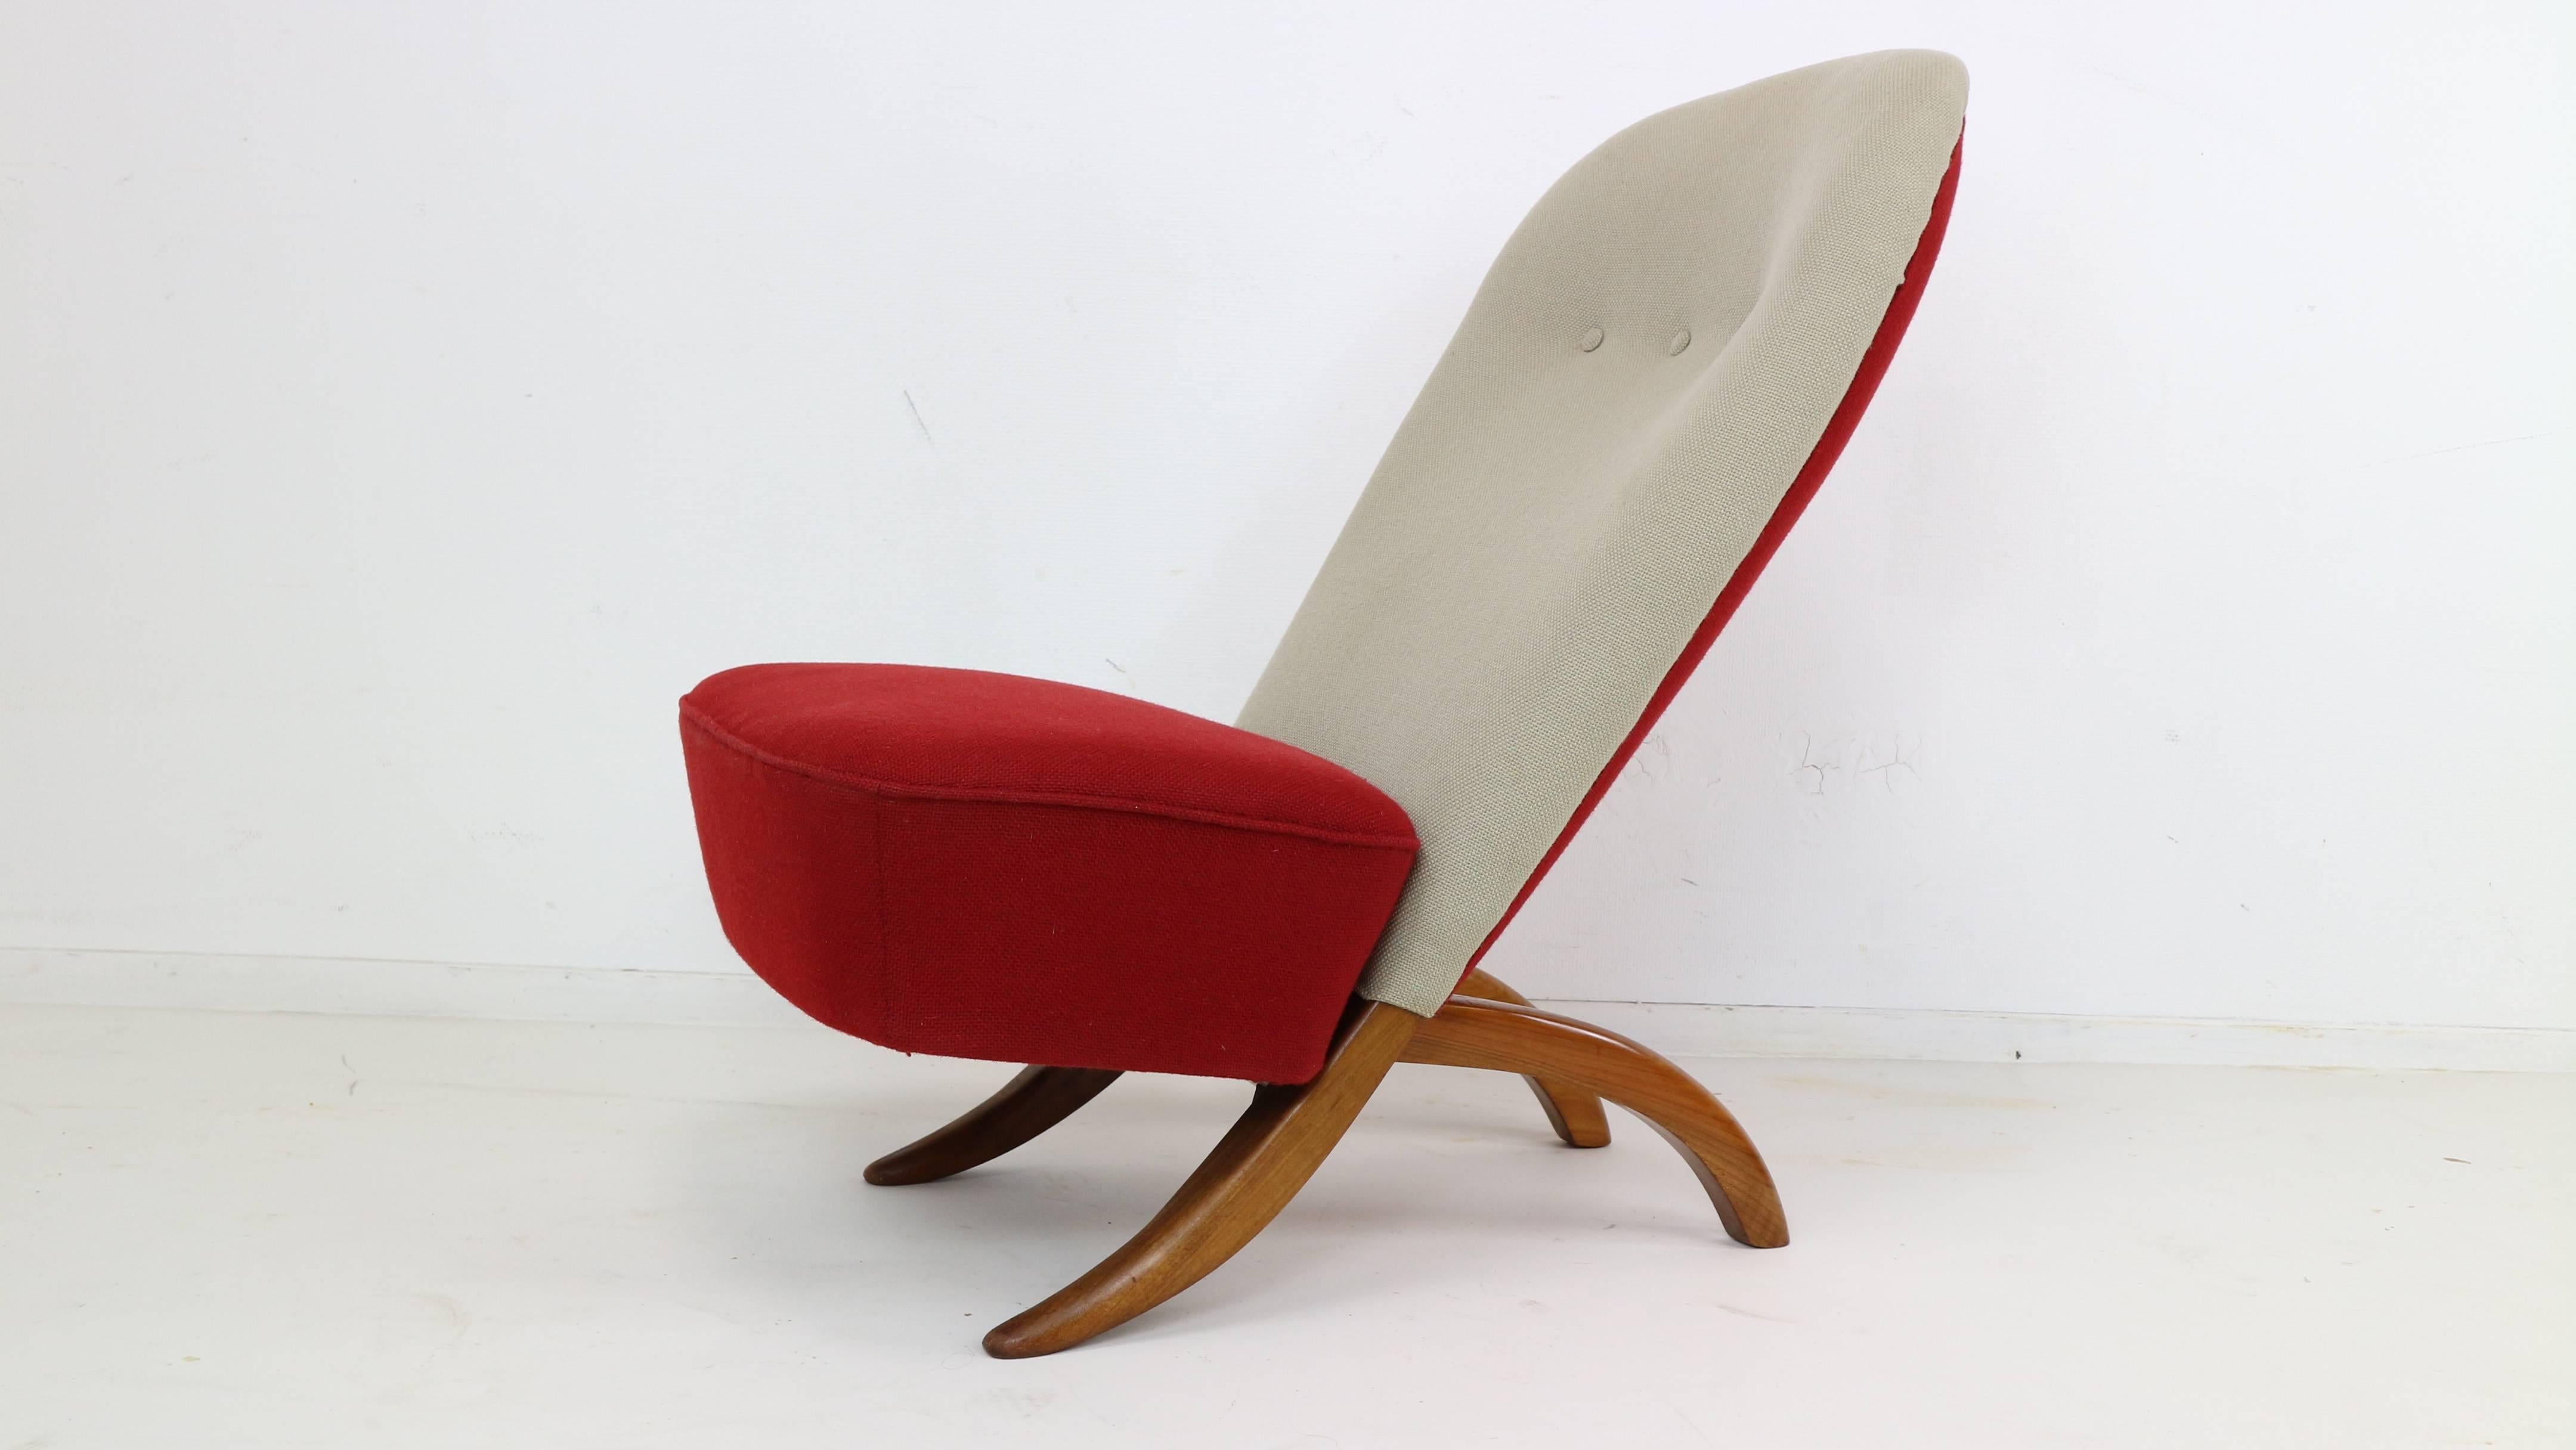 A pair of iconic easy chairs, model Congo, by Dutch designer Theo Ruth for the firm Artifort 1952.
The chair draws it's inspiration from a traditional African chair, each chair consist of 2 pieces that slot into one another and held together by the